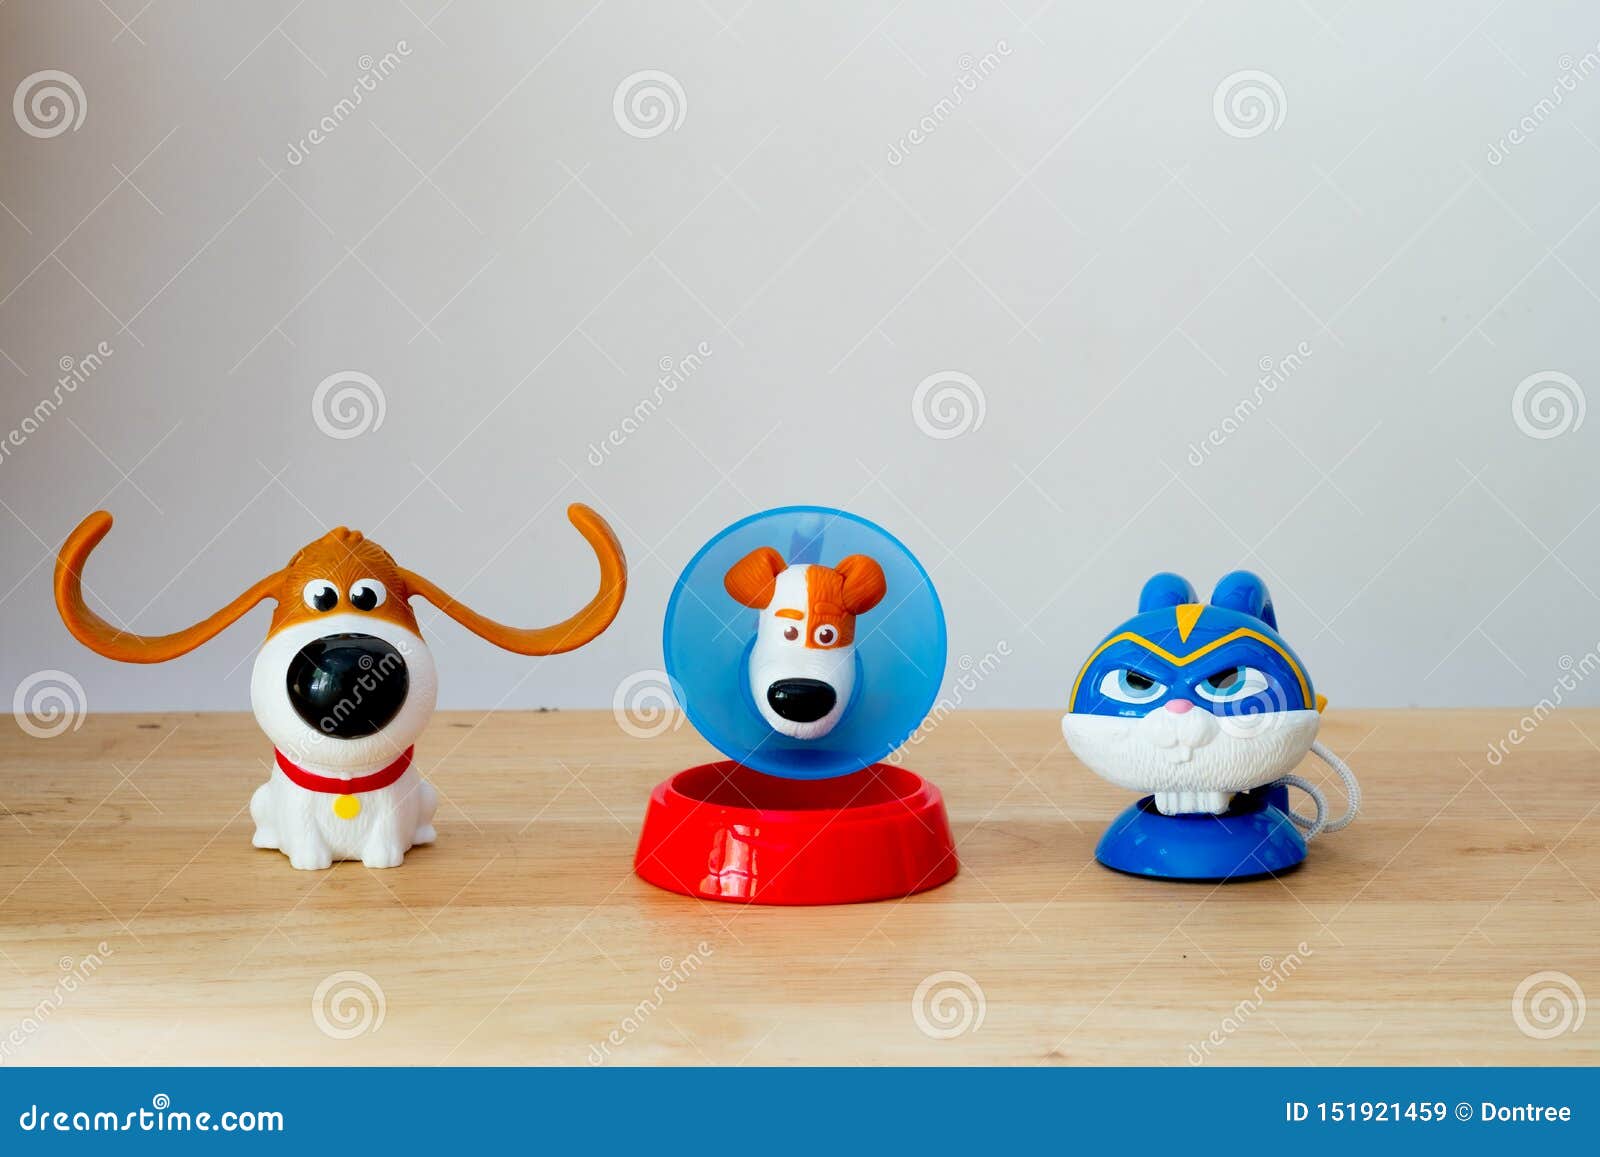 McDonald's Toy Happy Meal 2019 The Secret Life of Pets 2 